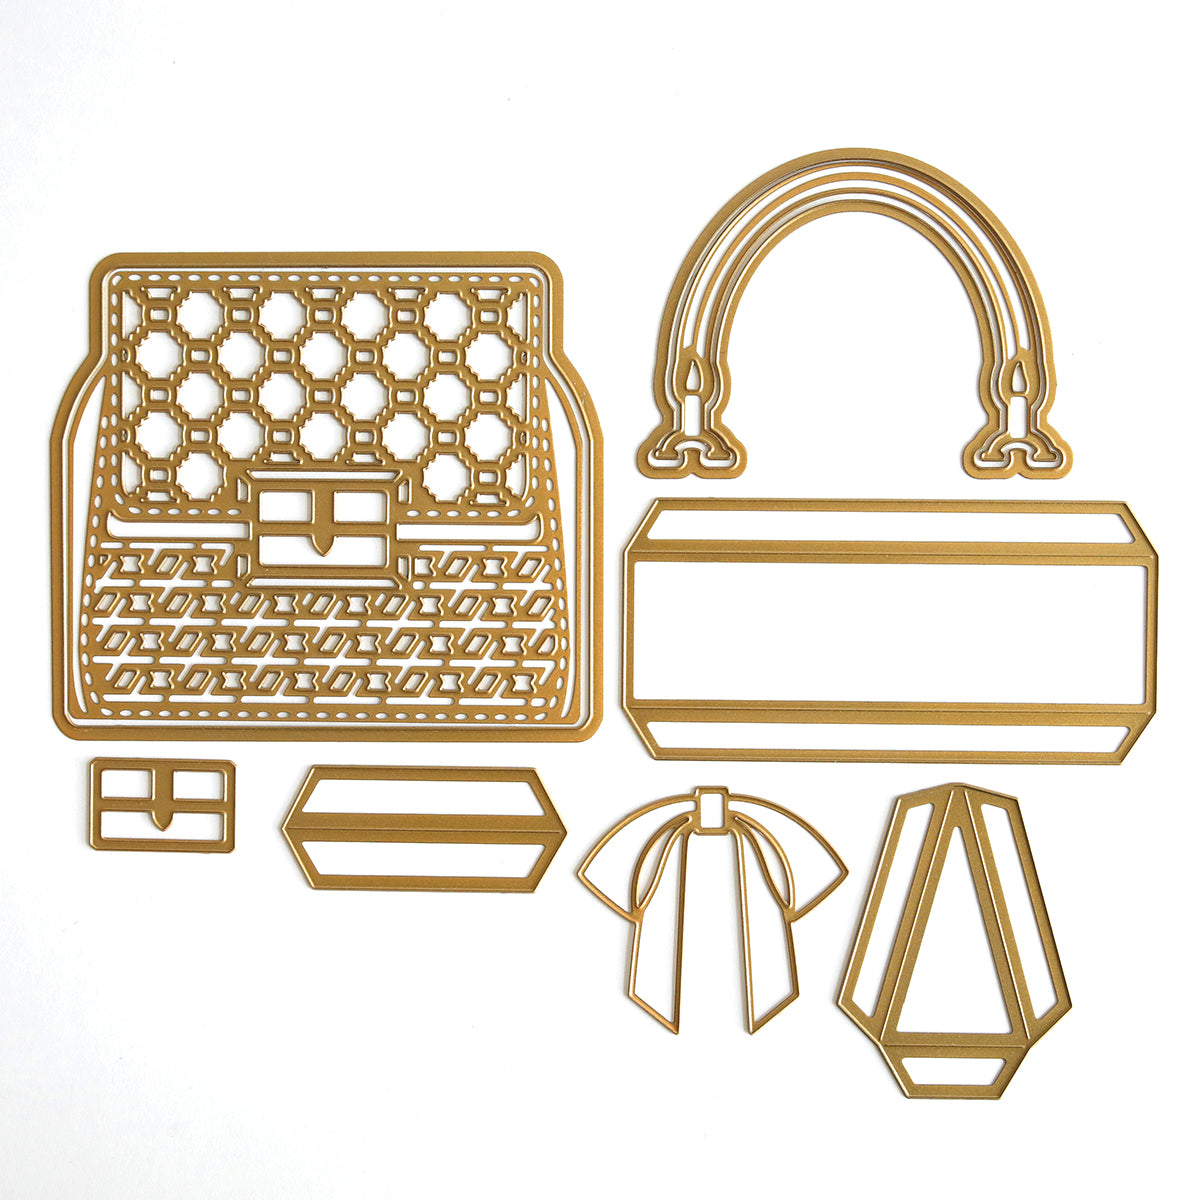 a cutout of a purse and other items.